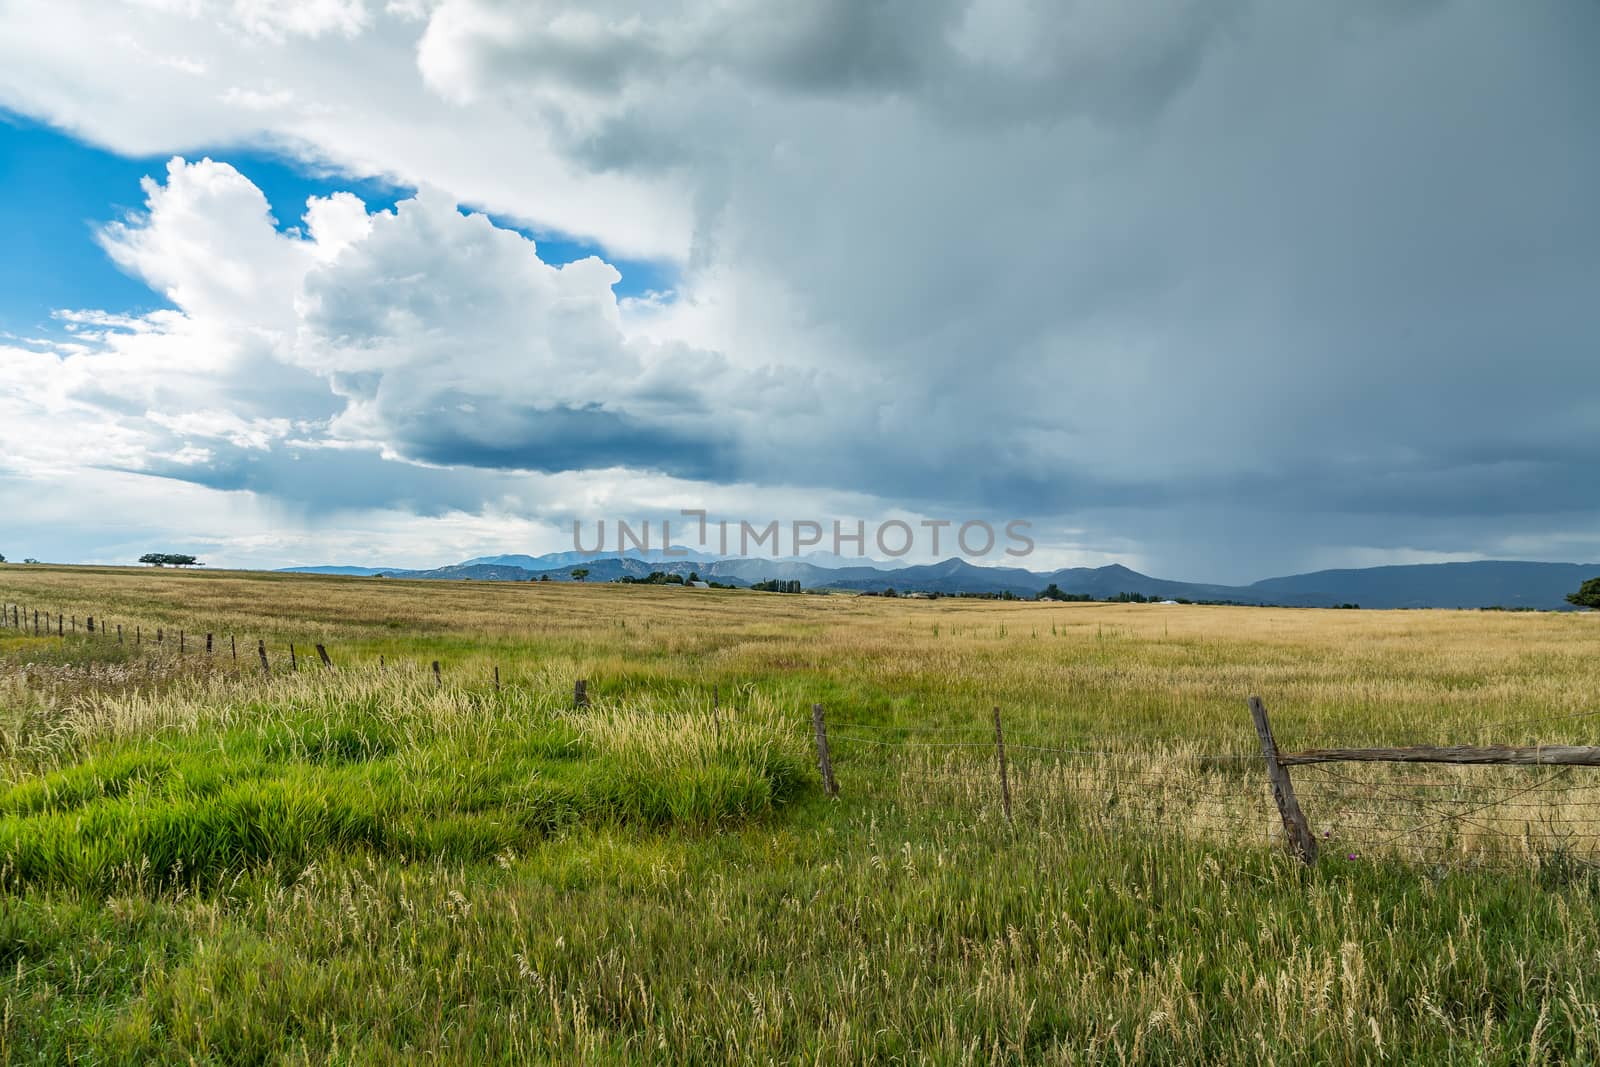 A thunder storm approaches from the mountains along US Highway 160 in Colorado.